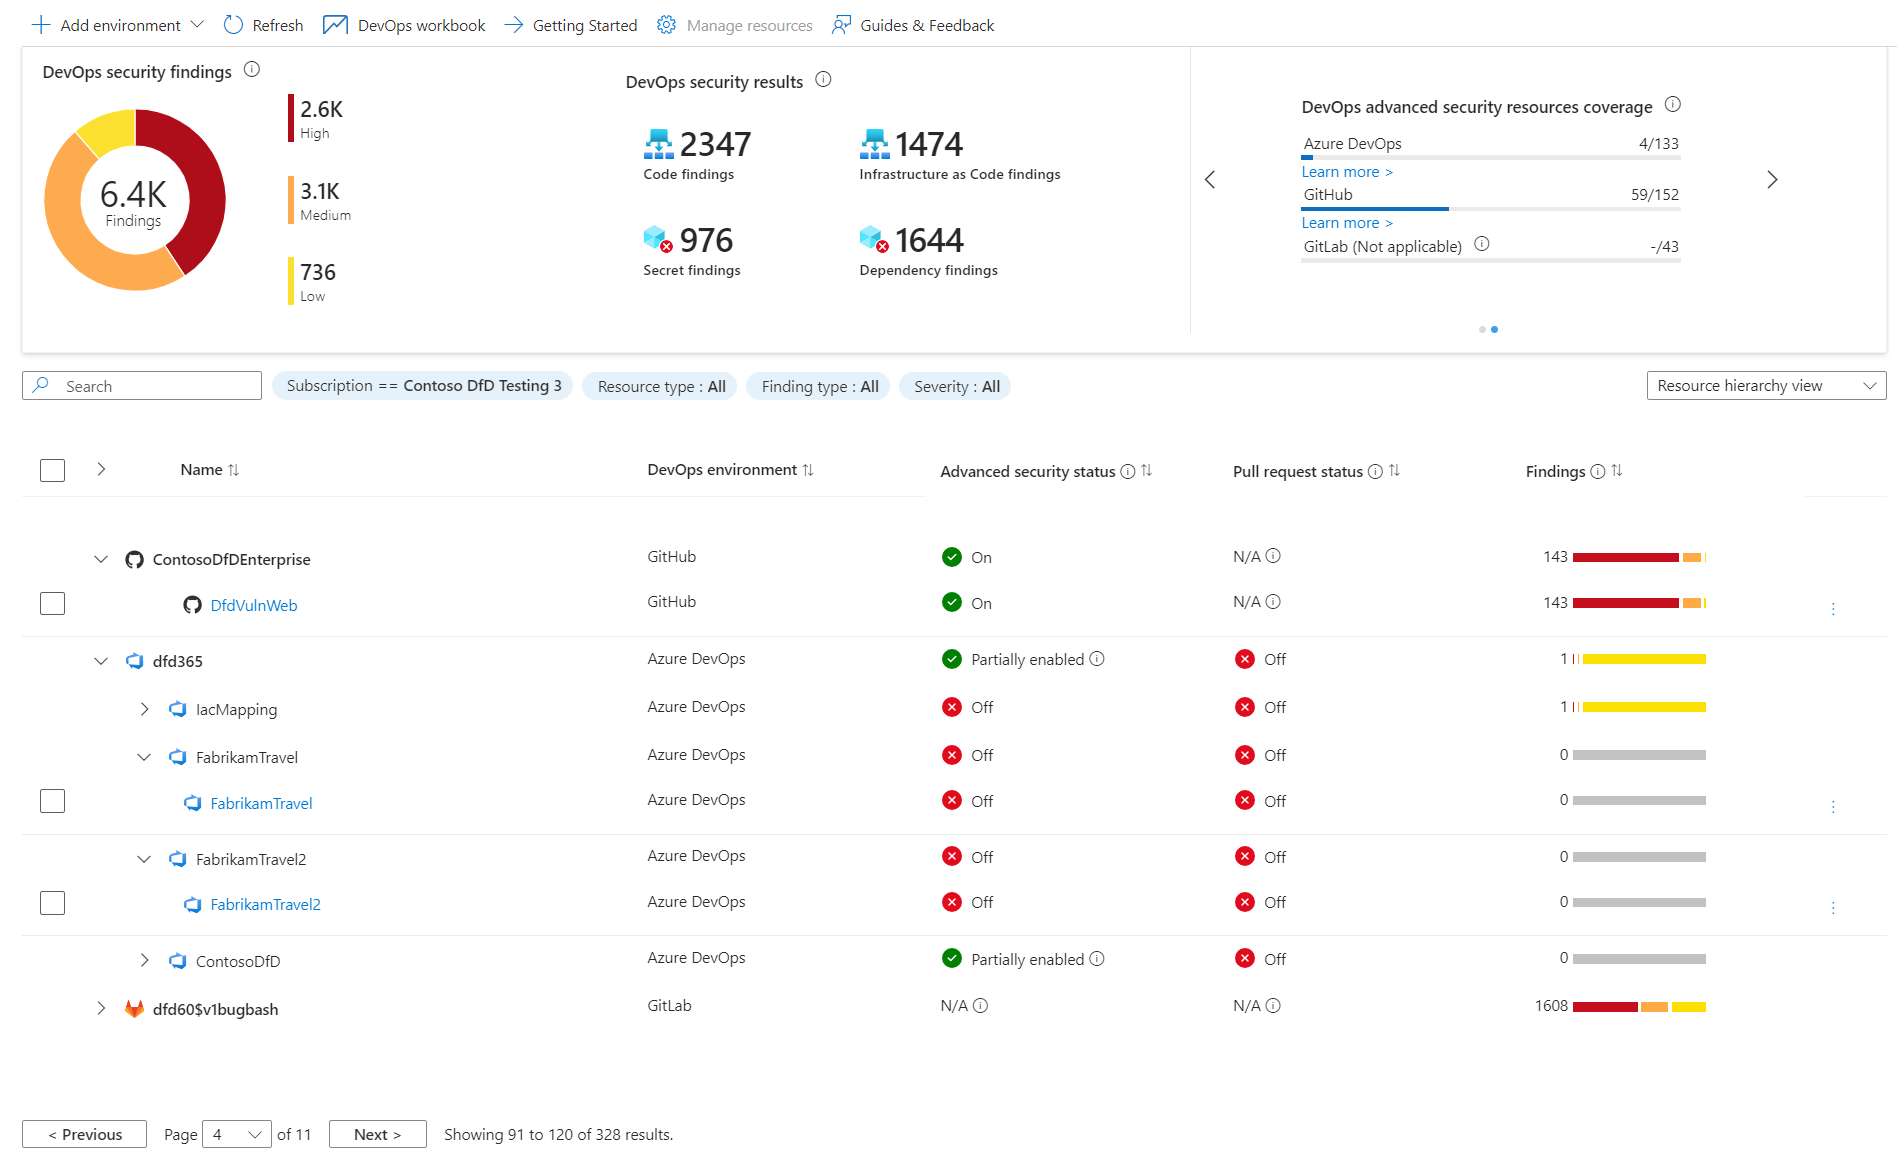 Screenshot of the top of the DevOps security page that shows all of your onboarded environments and their metrics.